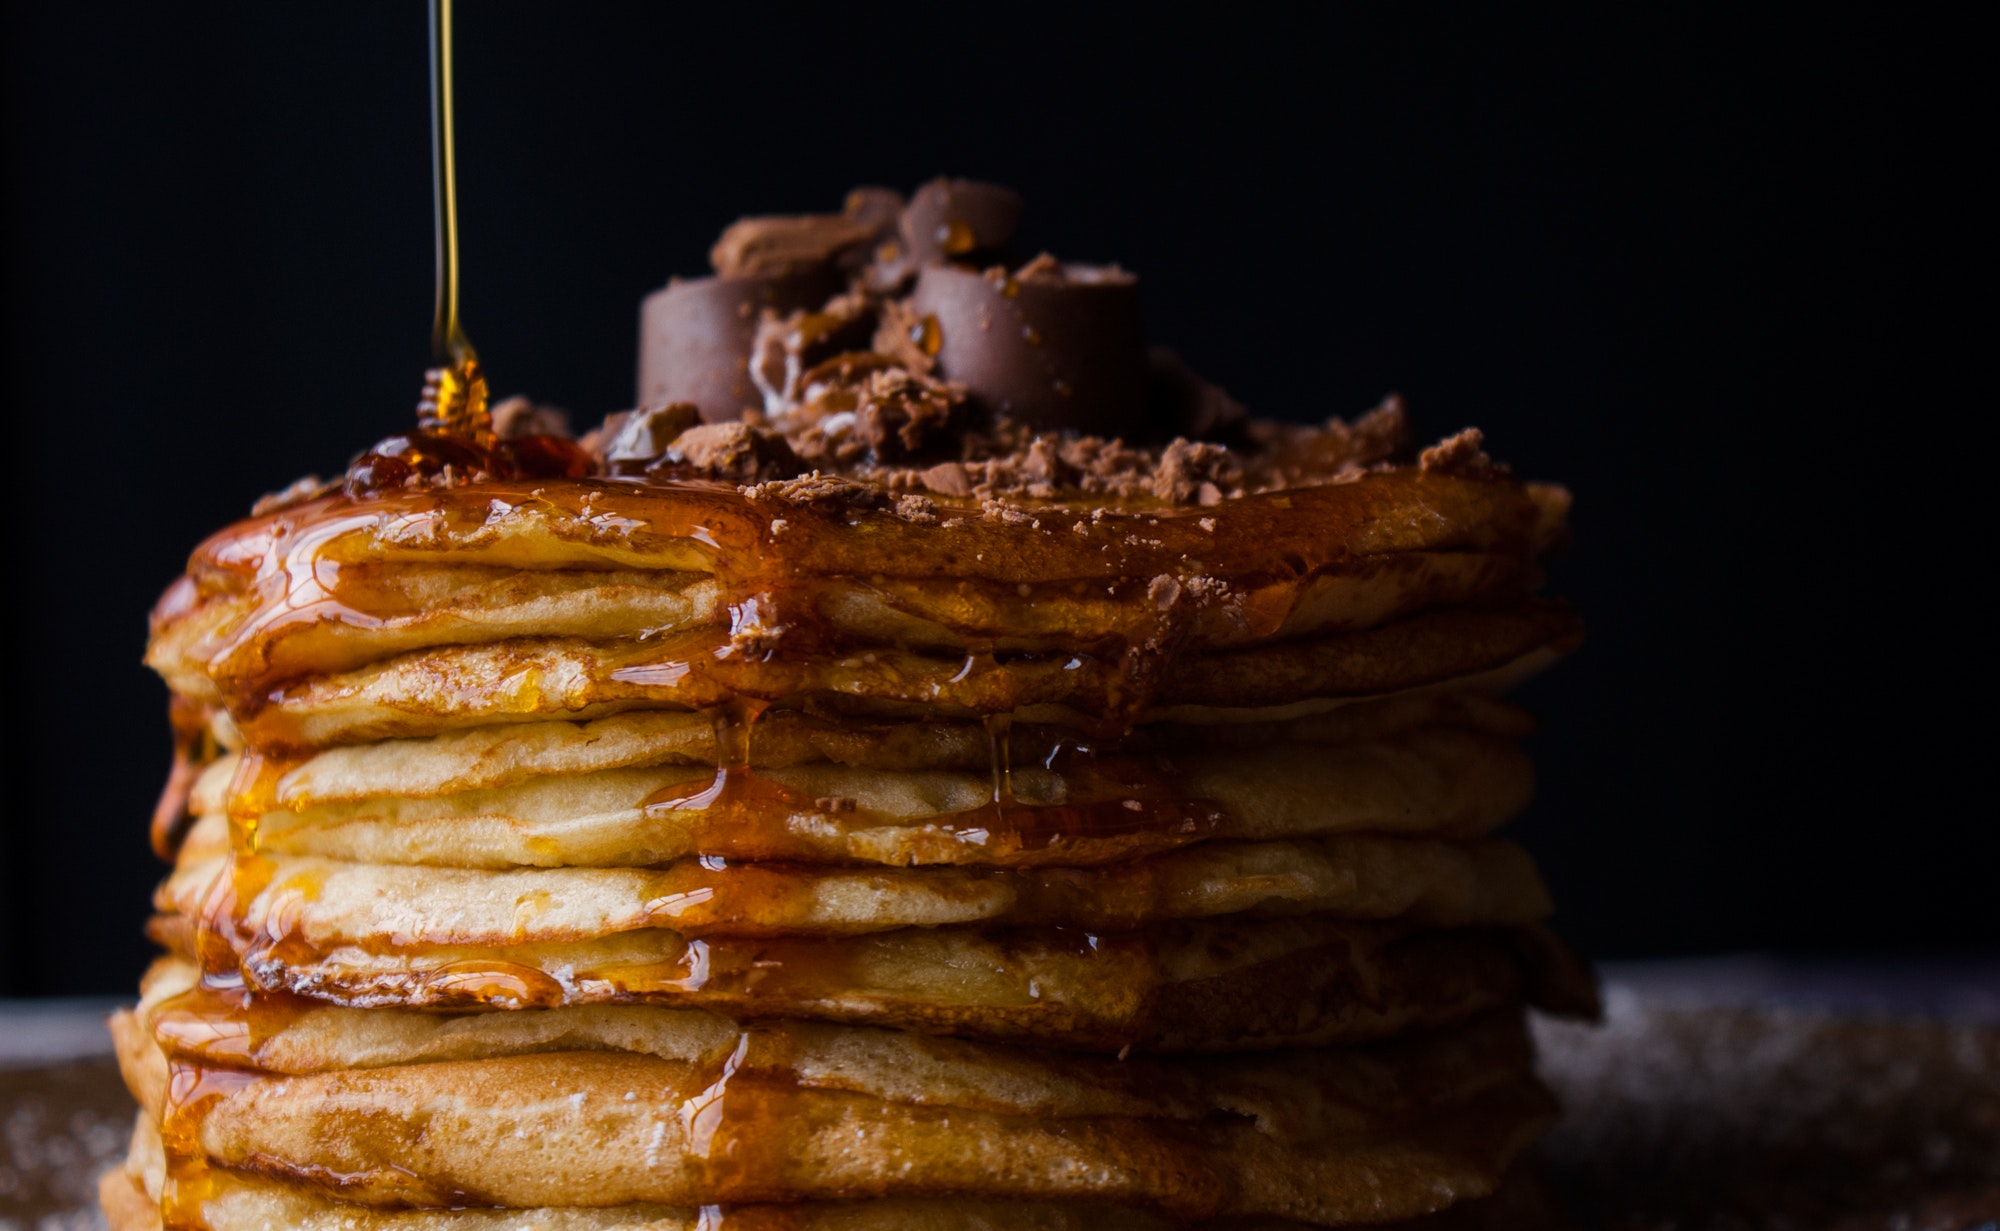 An occasional cheat meal like these chocolate pancakes can actually help you sustain your weight loss long term.